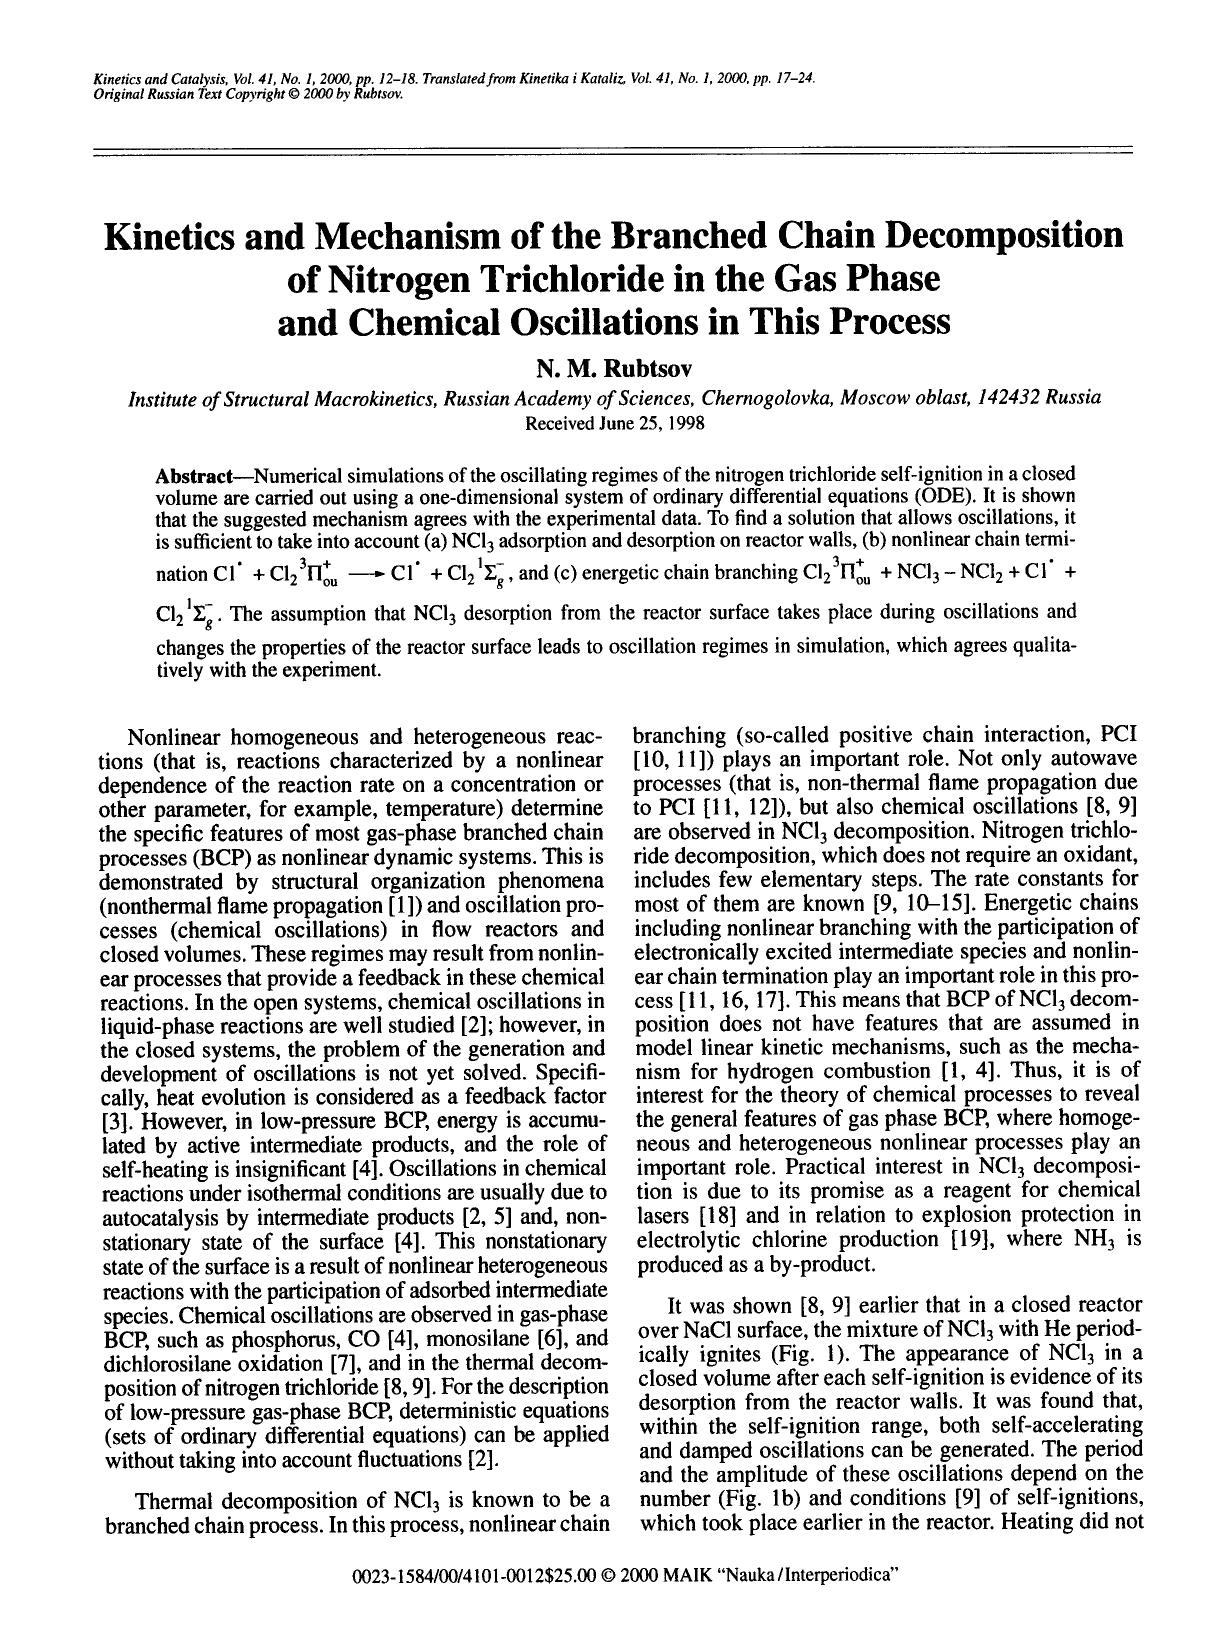 Kinetics and mechanism of the branched chain decomposition of nitrogen trichloride in the gas phase and chemical oscillations in this process by Unknown